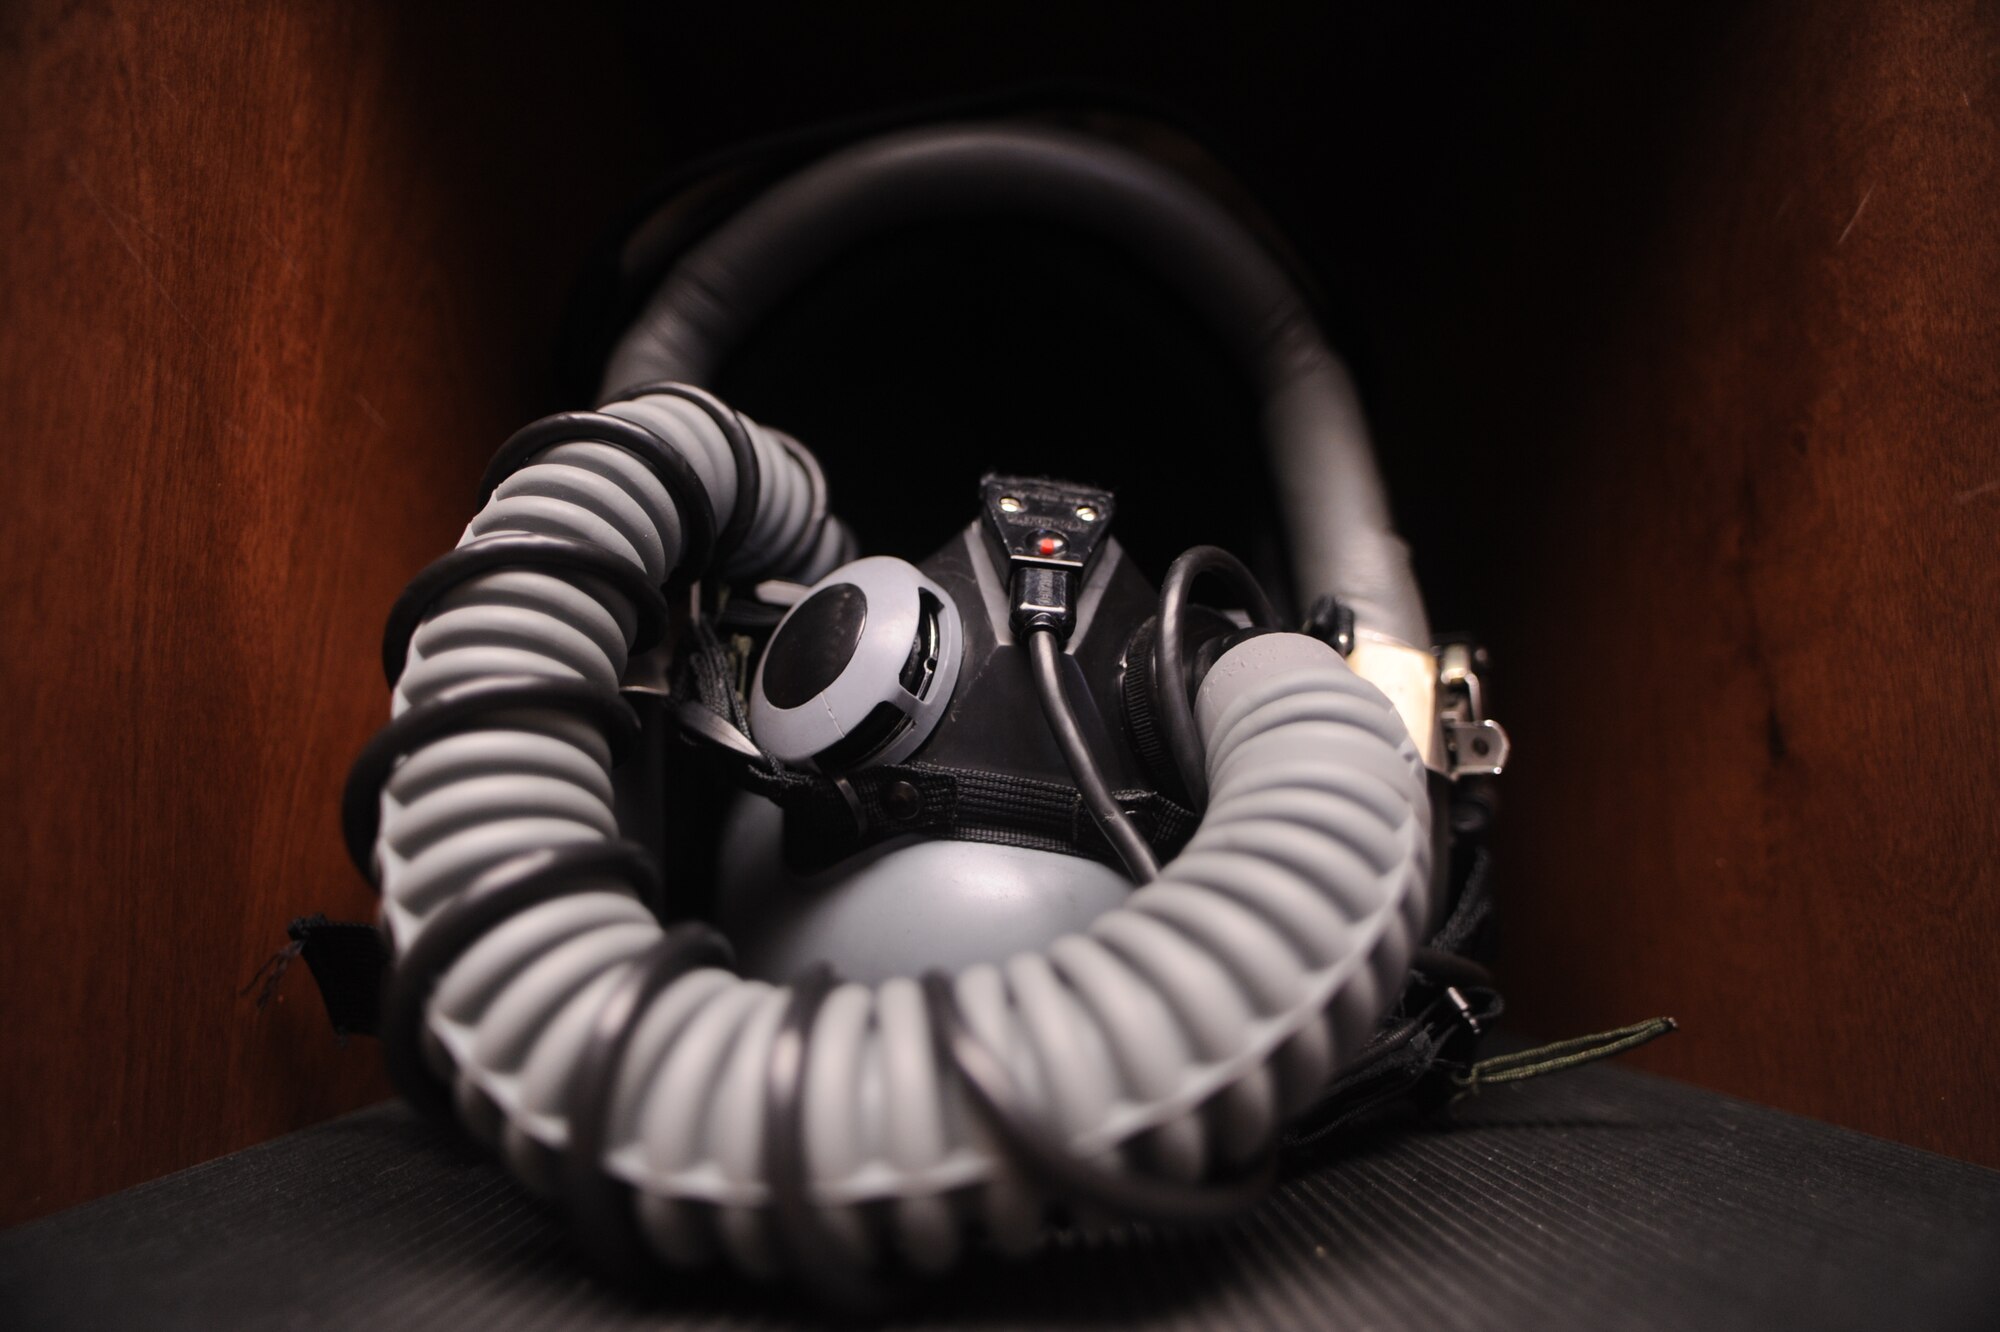 A U.S. Air Force pilot’s helmet of the 357th Fighter Squadron lays displayed in a cubby at Davis-Monthan Air Force Base, Ariz., Nov. 16, 2012. The Airmen from the 355th Operations Support Squadron Aircrew Flight Equipment clean the pilot’s equipment on a monthly basis. (U.S. Air Force photo by Airman 1st Class Christine Griffiths/Released)